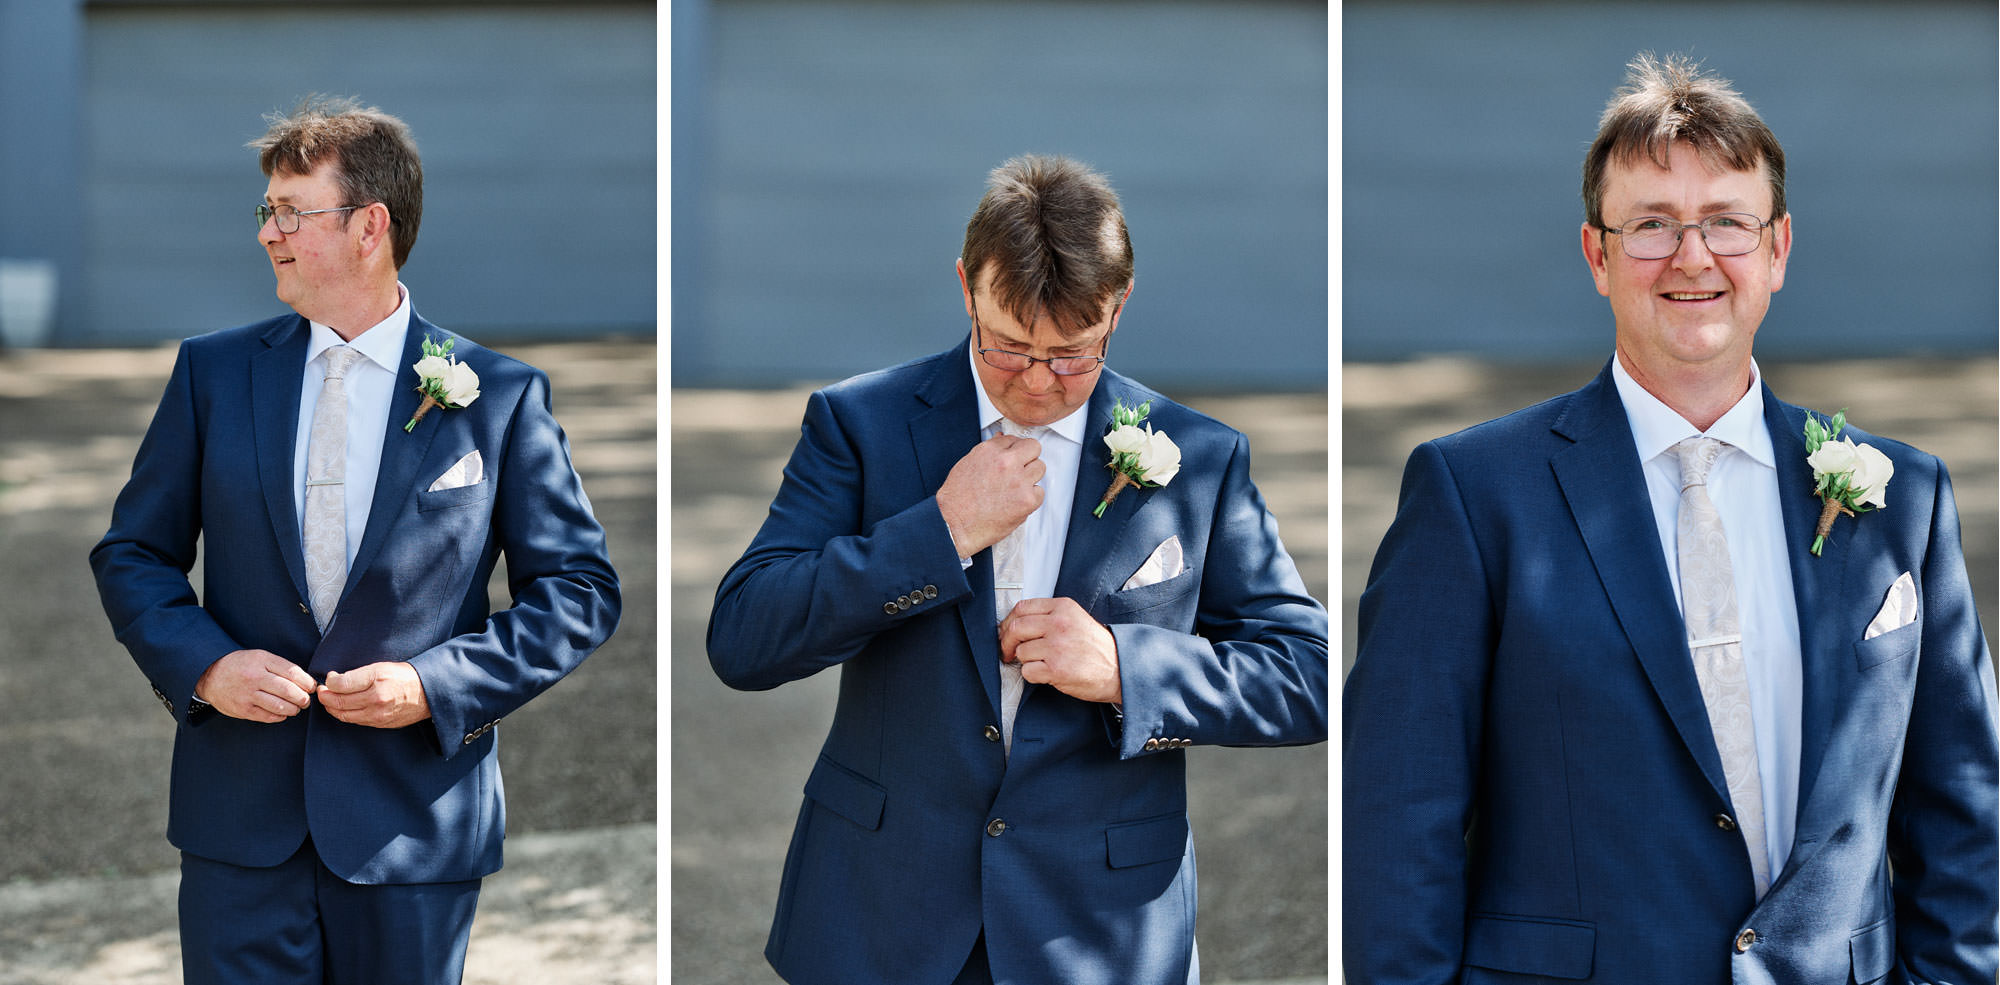 the very dapper groom ready for his wedding